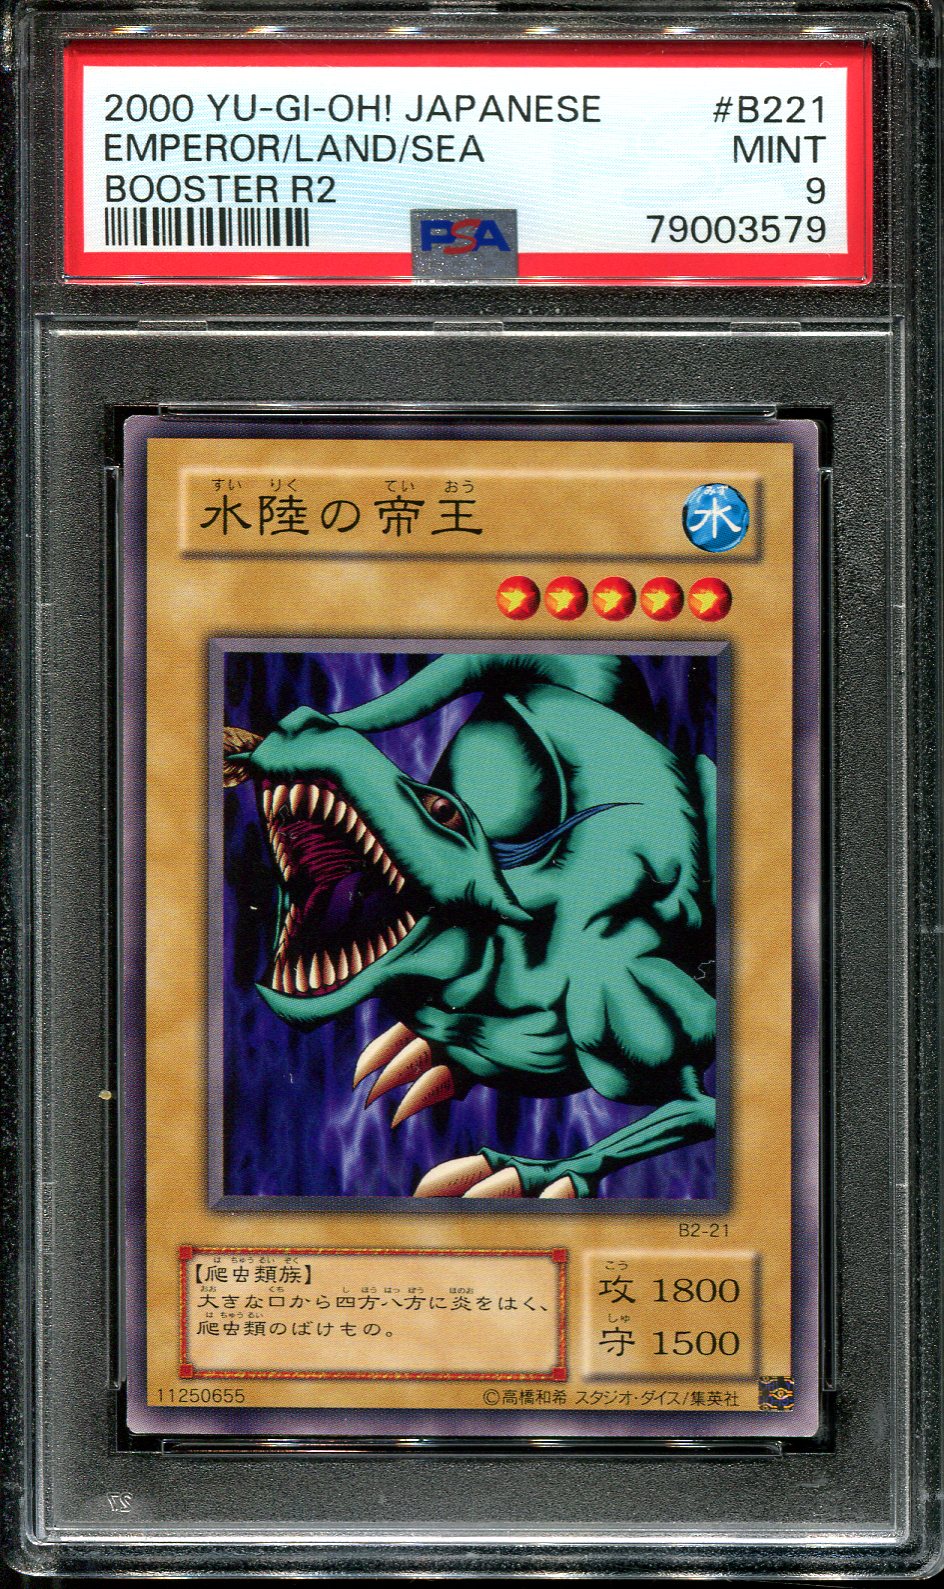 YUGIOH - PSA 9 - EMPEROR OF LAND AND SEA - B2-21 - BOOSTER R2 - JAPANESE OCG